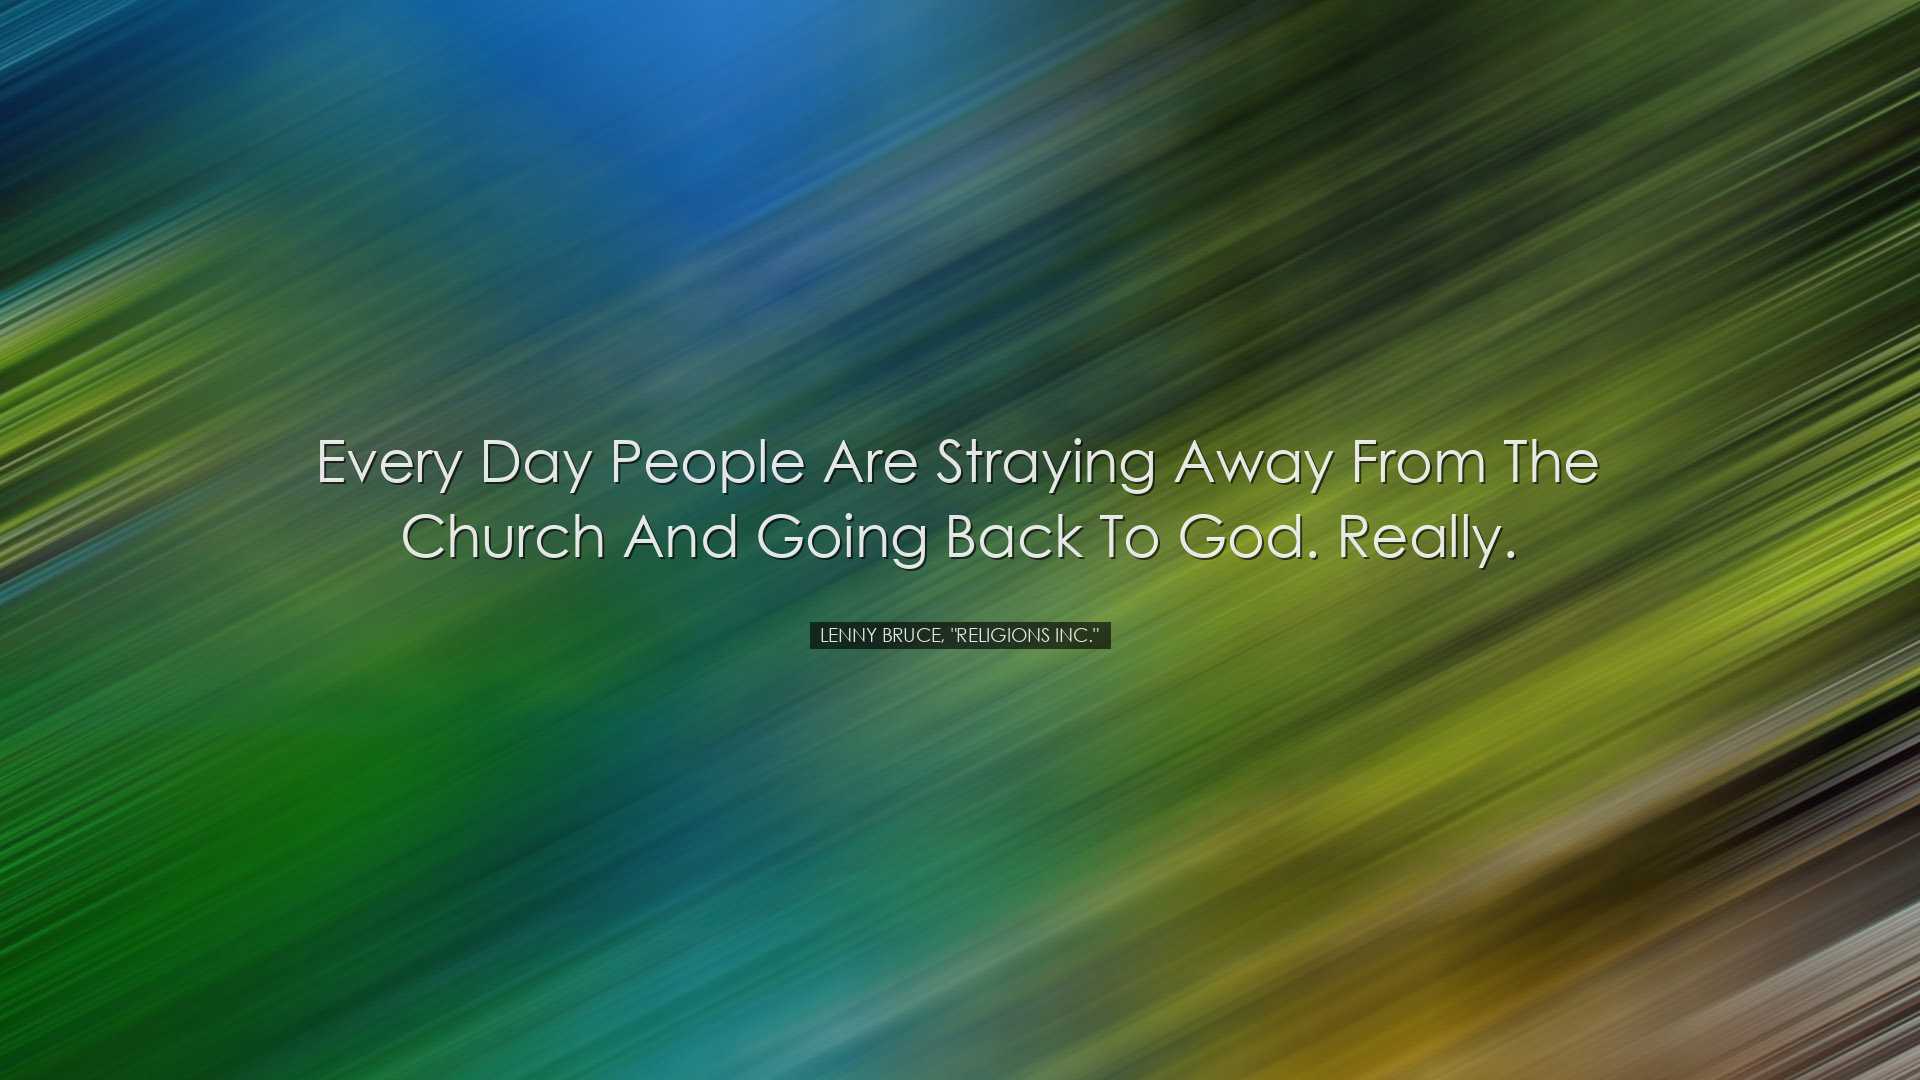 Every day people are straying away from the church and going back